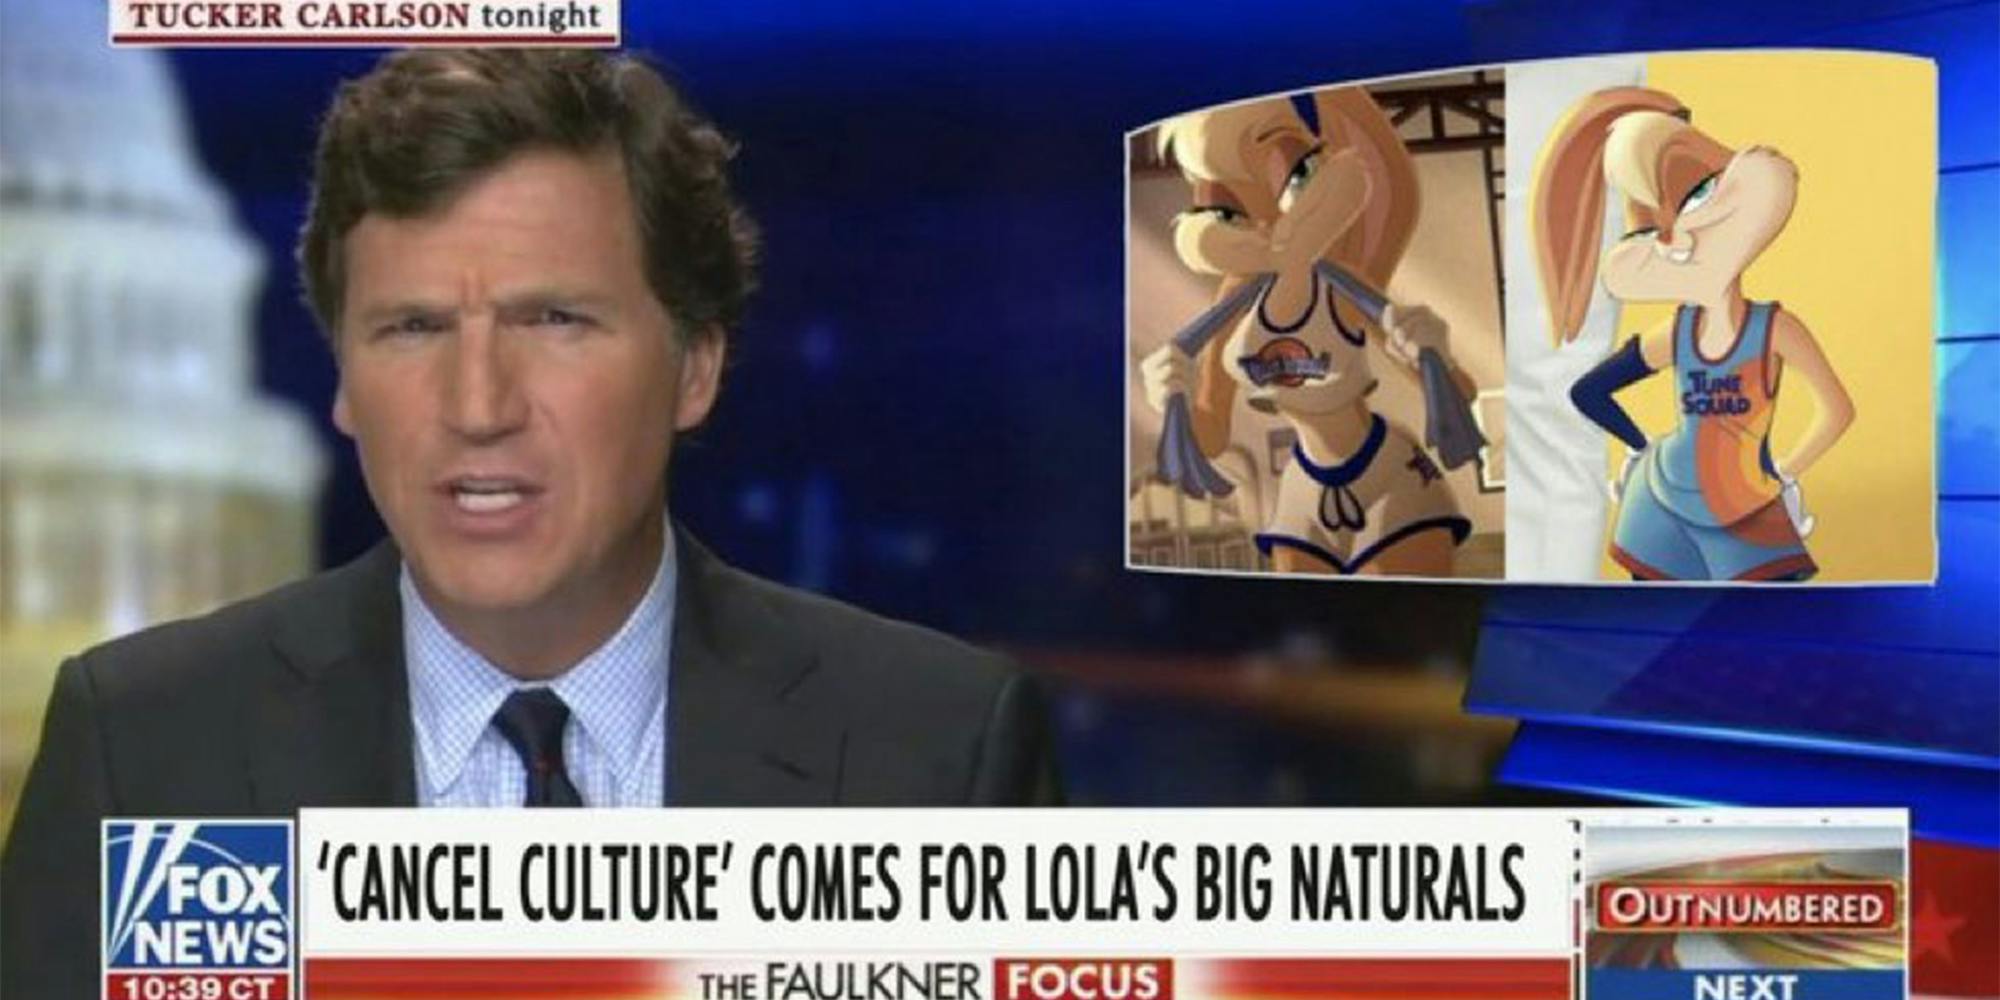 tucker carlson with inset of cartoon rabbit, caption "'cancel culture' comes for lola's big naturals"